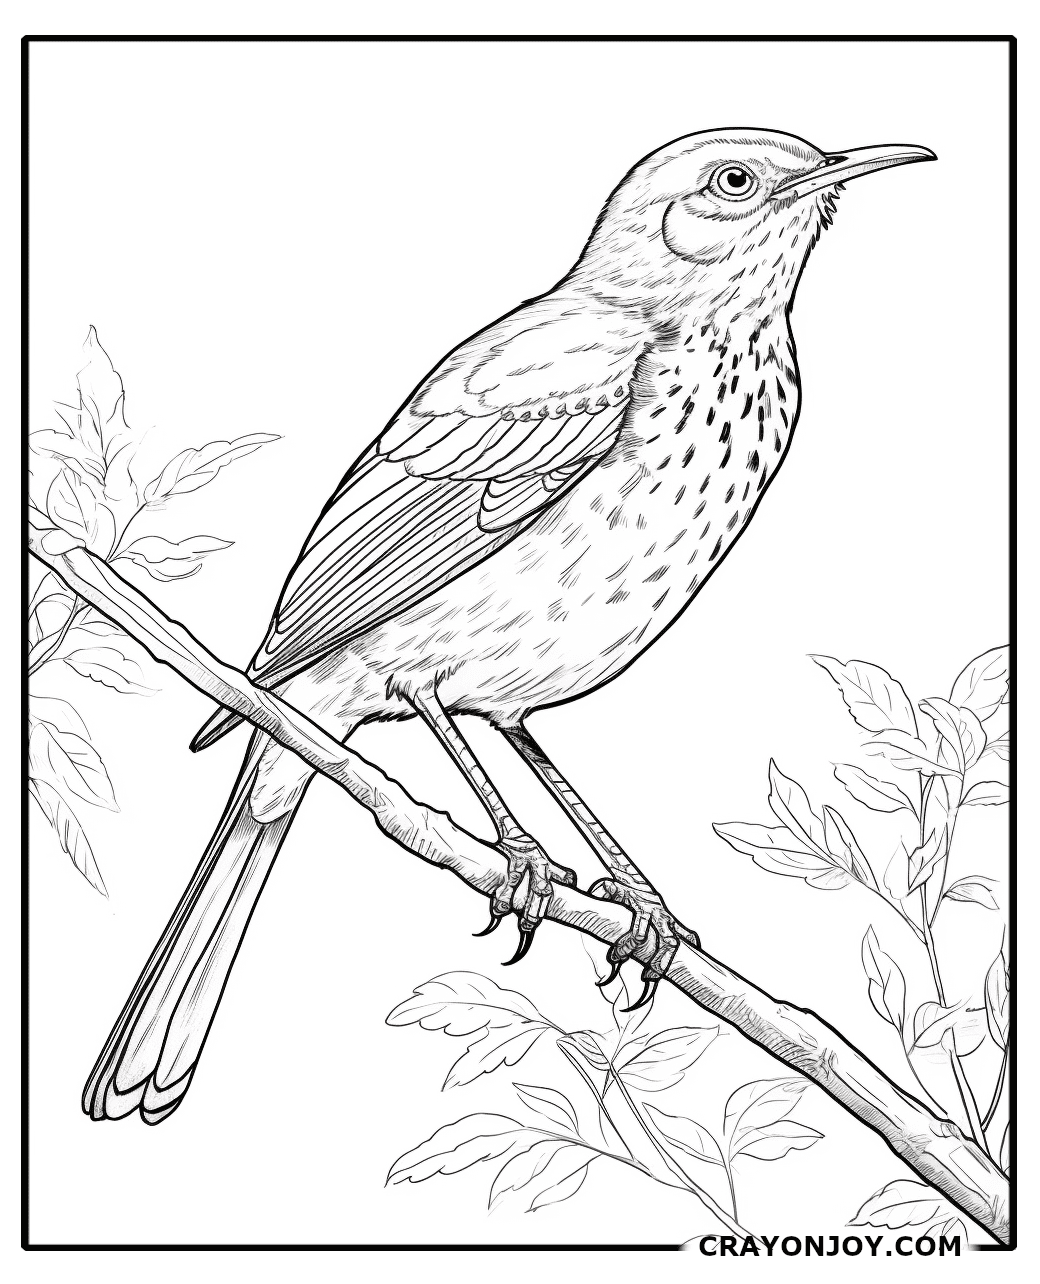 Brown-Thrasher Coloring Pages: Free Printable Sheets for Kids and Adults